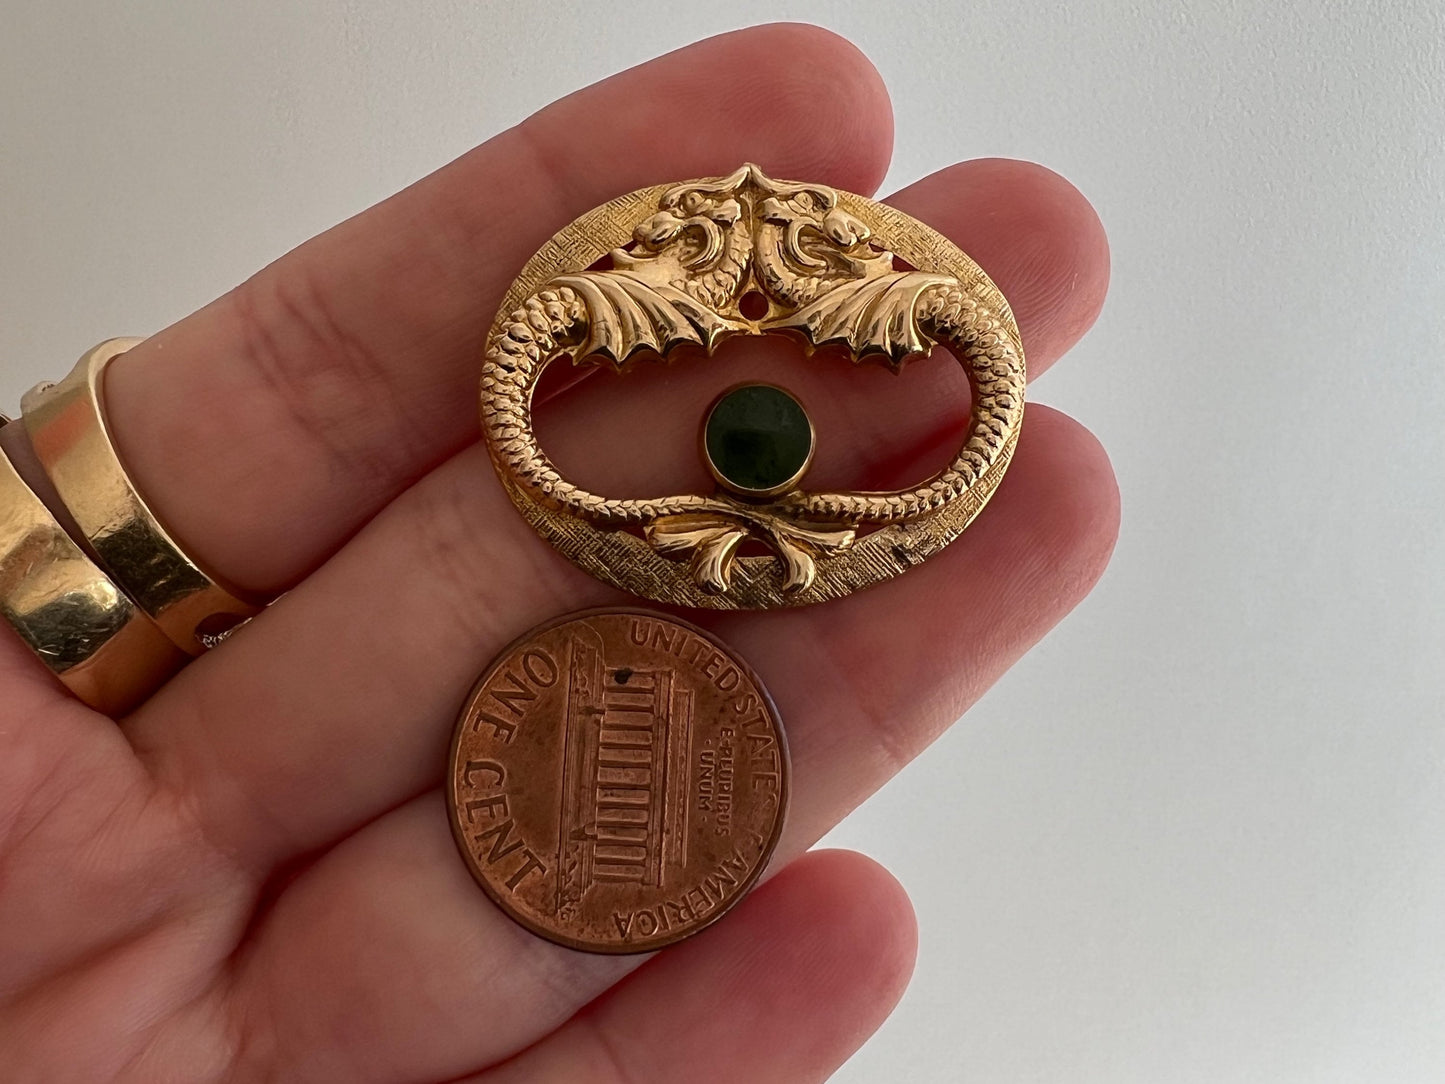 reimagined V I N T A G E // dragon duo / 14k solid yellow gold with spinach jade / pin conversion pendant / double dragon